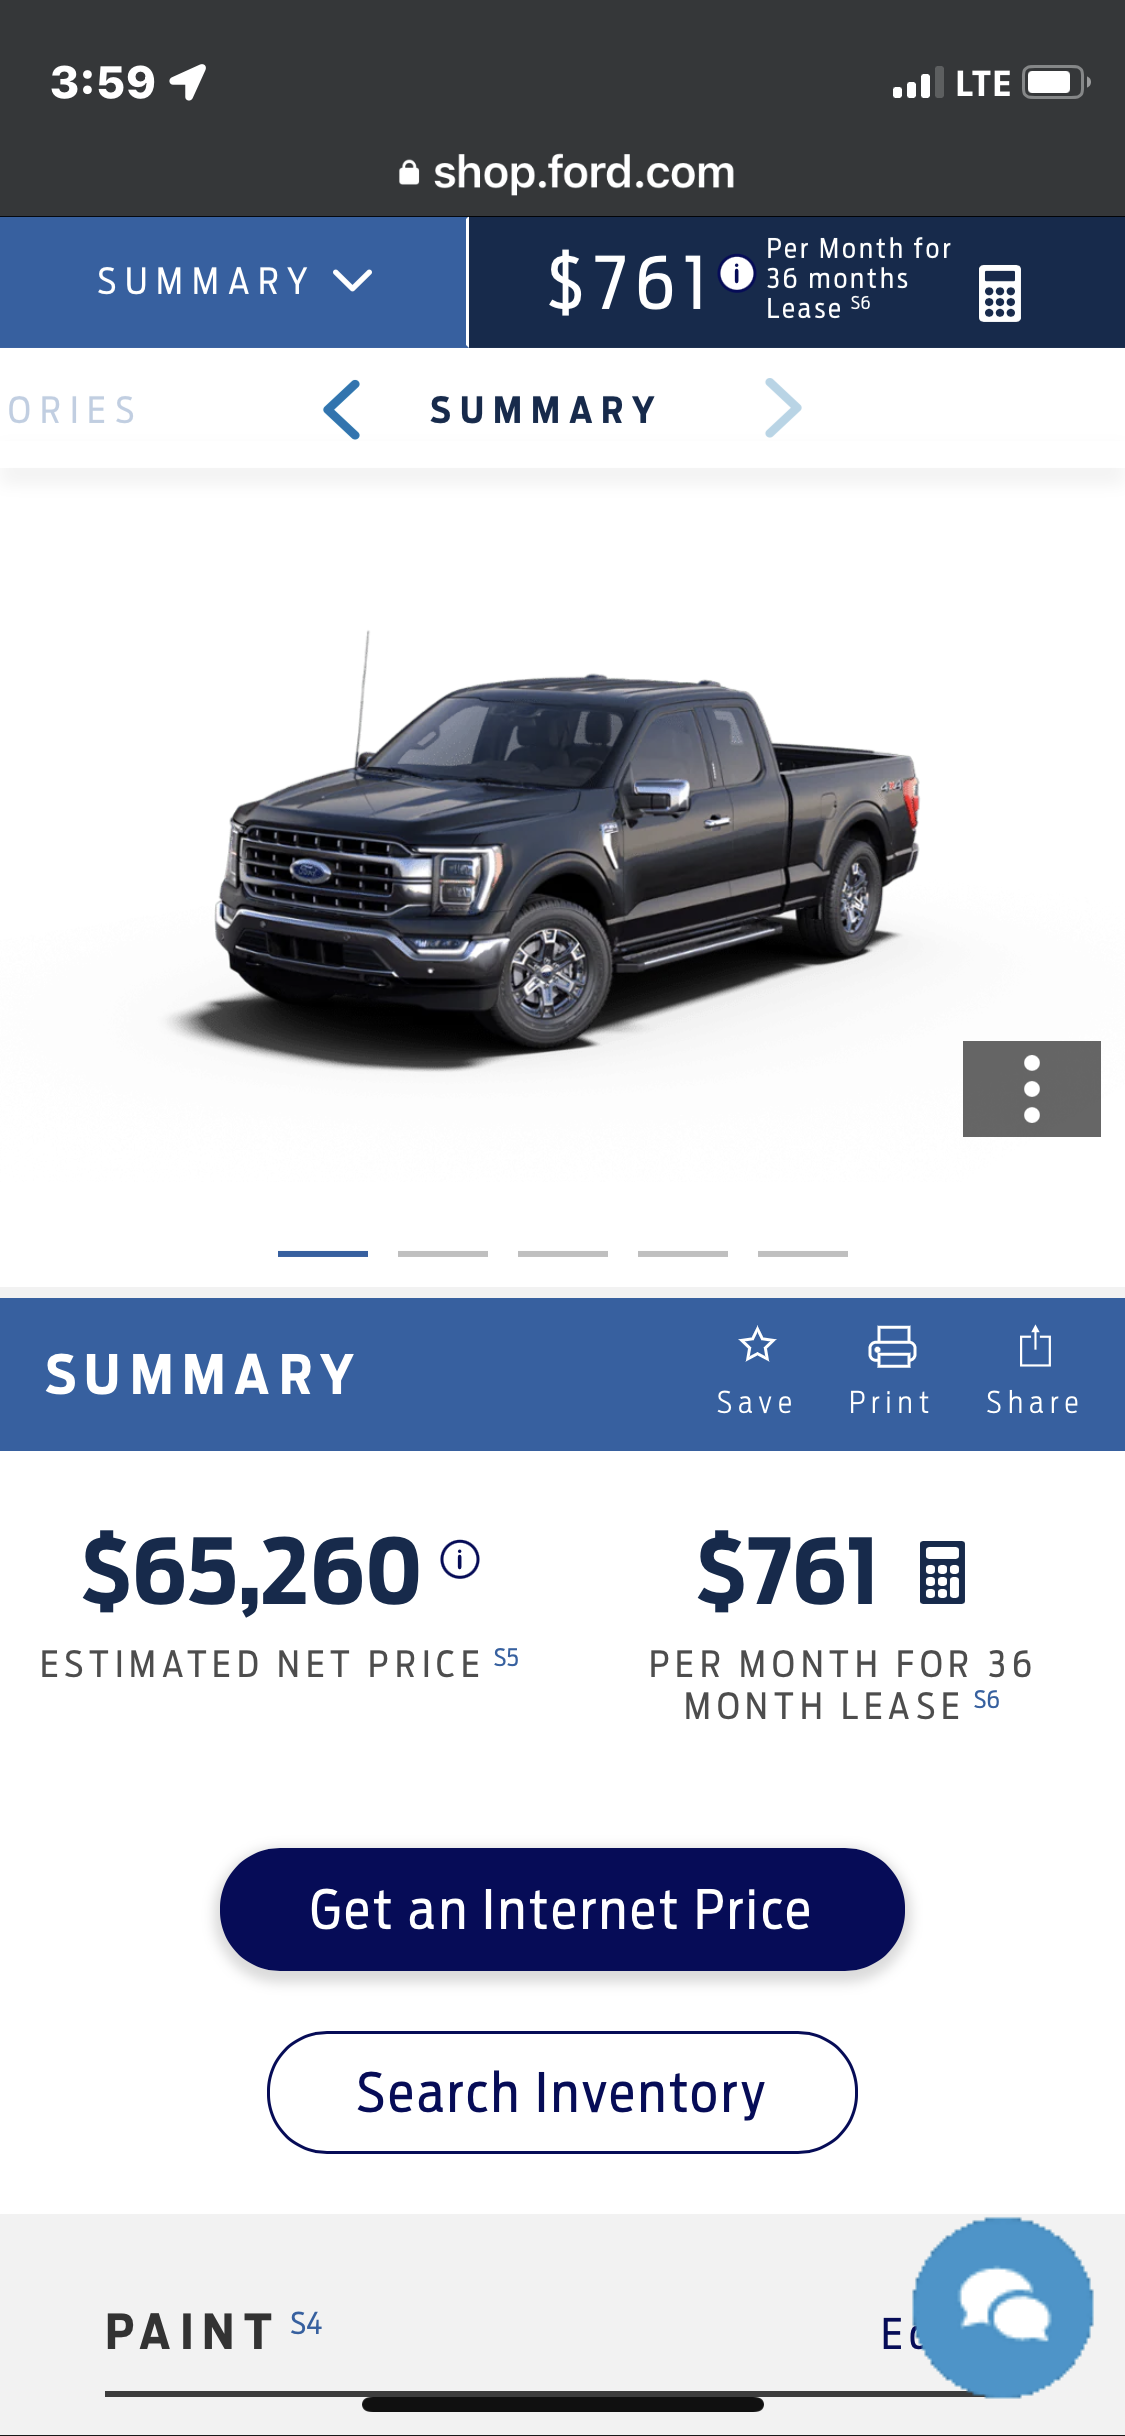 Ford Bronco F150 Lightning 2023 Build and Price is up and prices are way up 0FCF5506-DD5C-4C01-A024-292A86DF3EAD